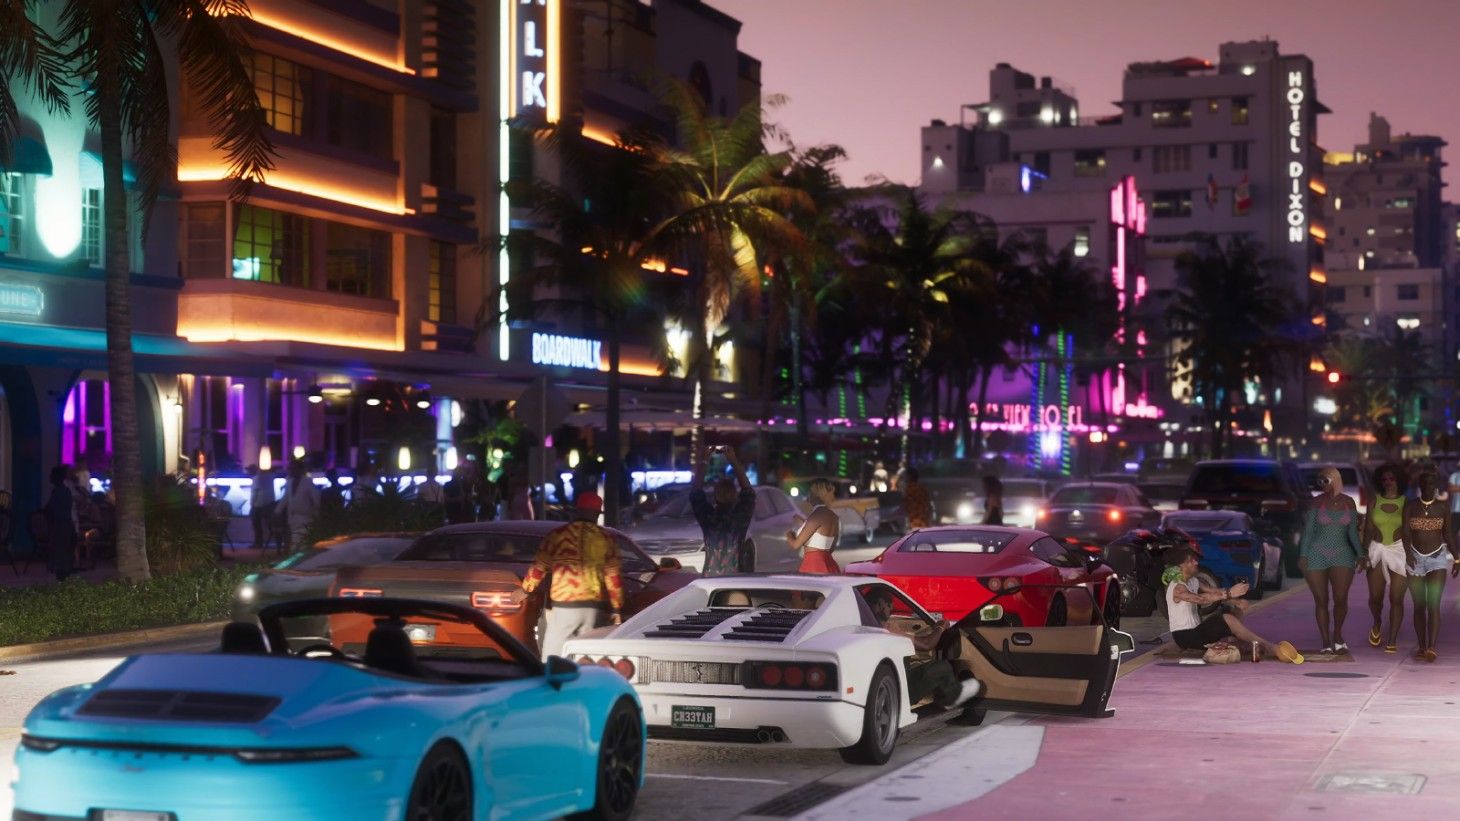 GTA VI trailer: Characters, setting, plot, and more to look forward to